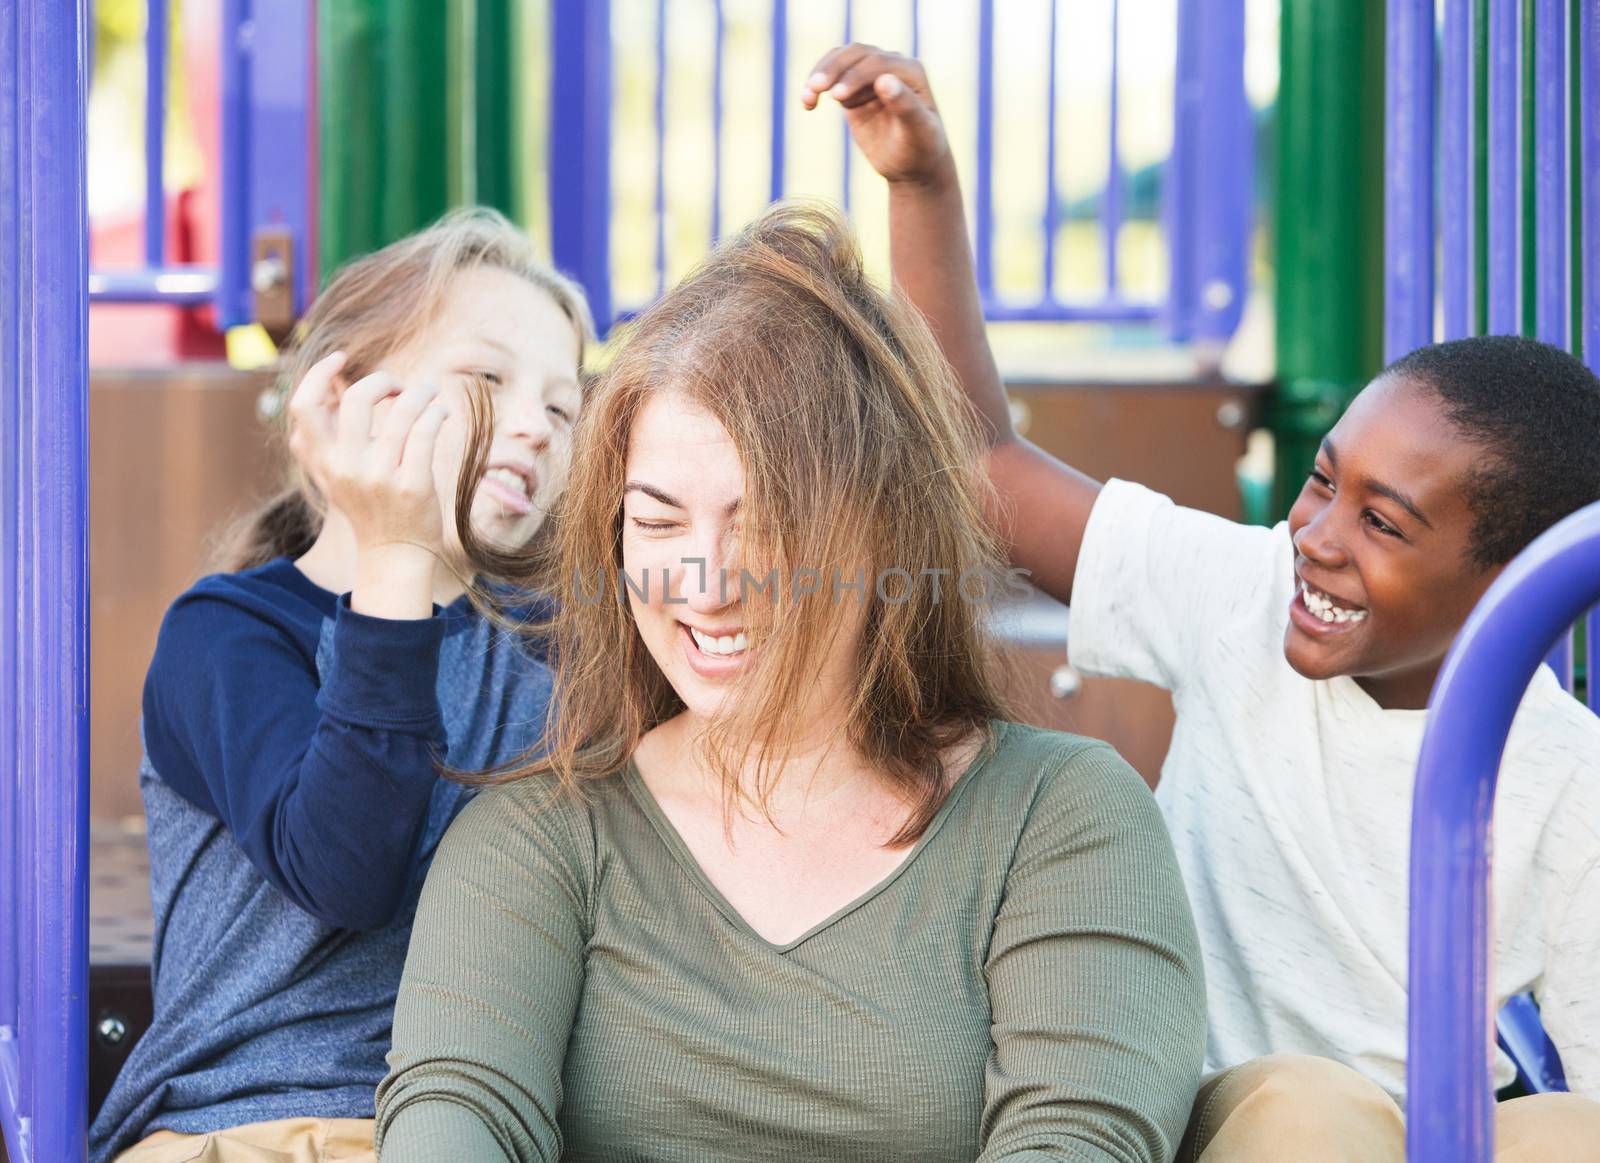 Silly children playing with hair of laughing woman